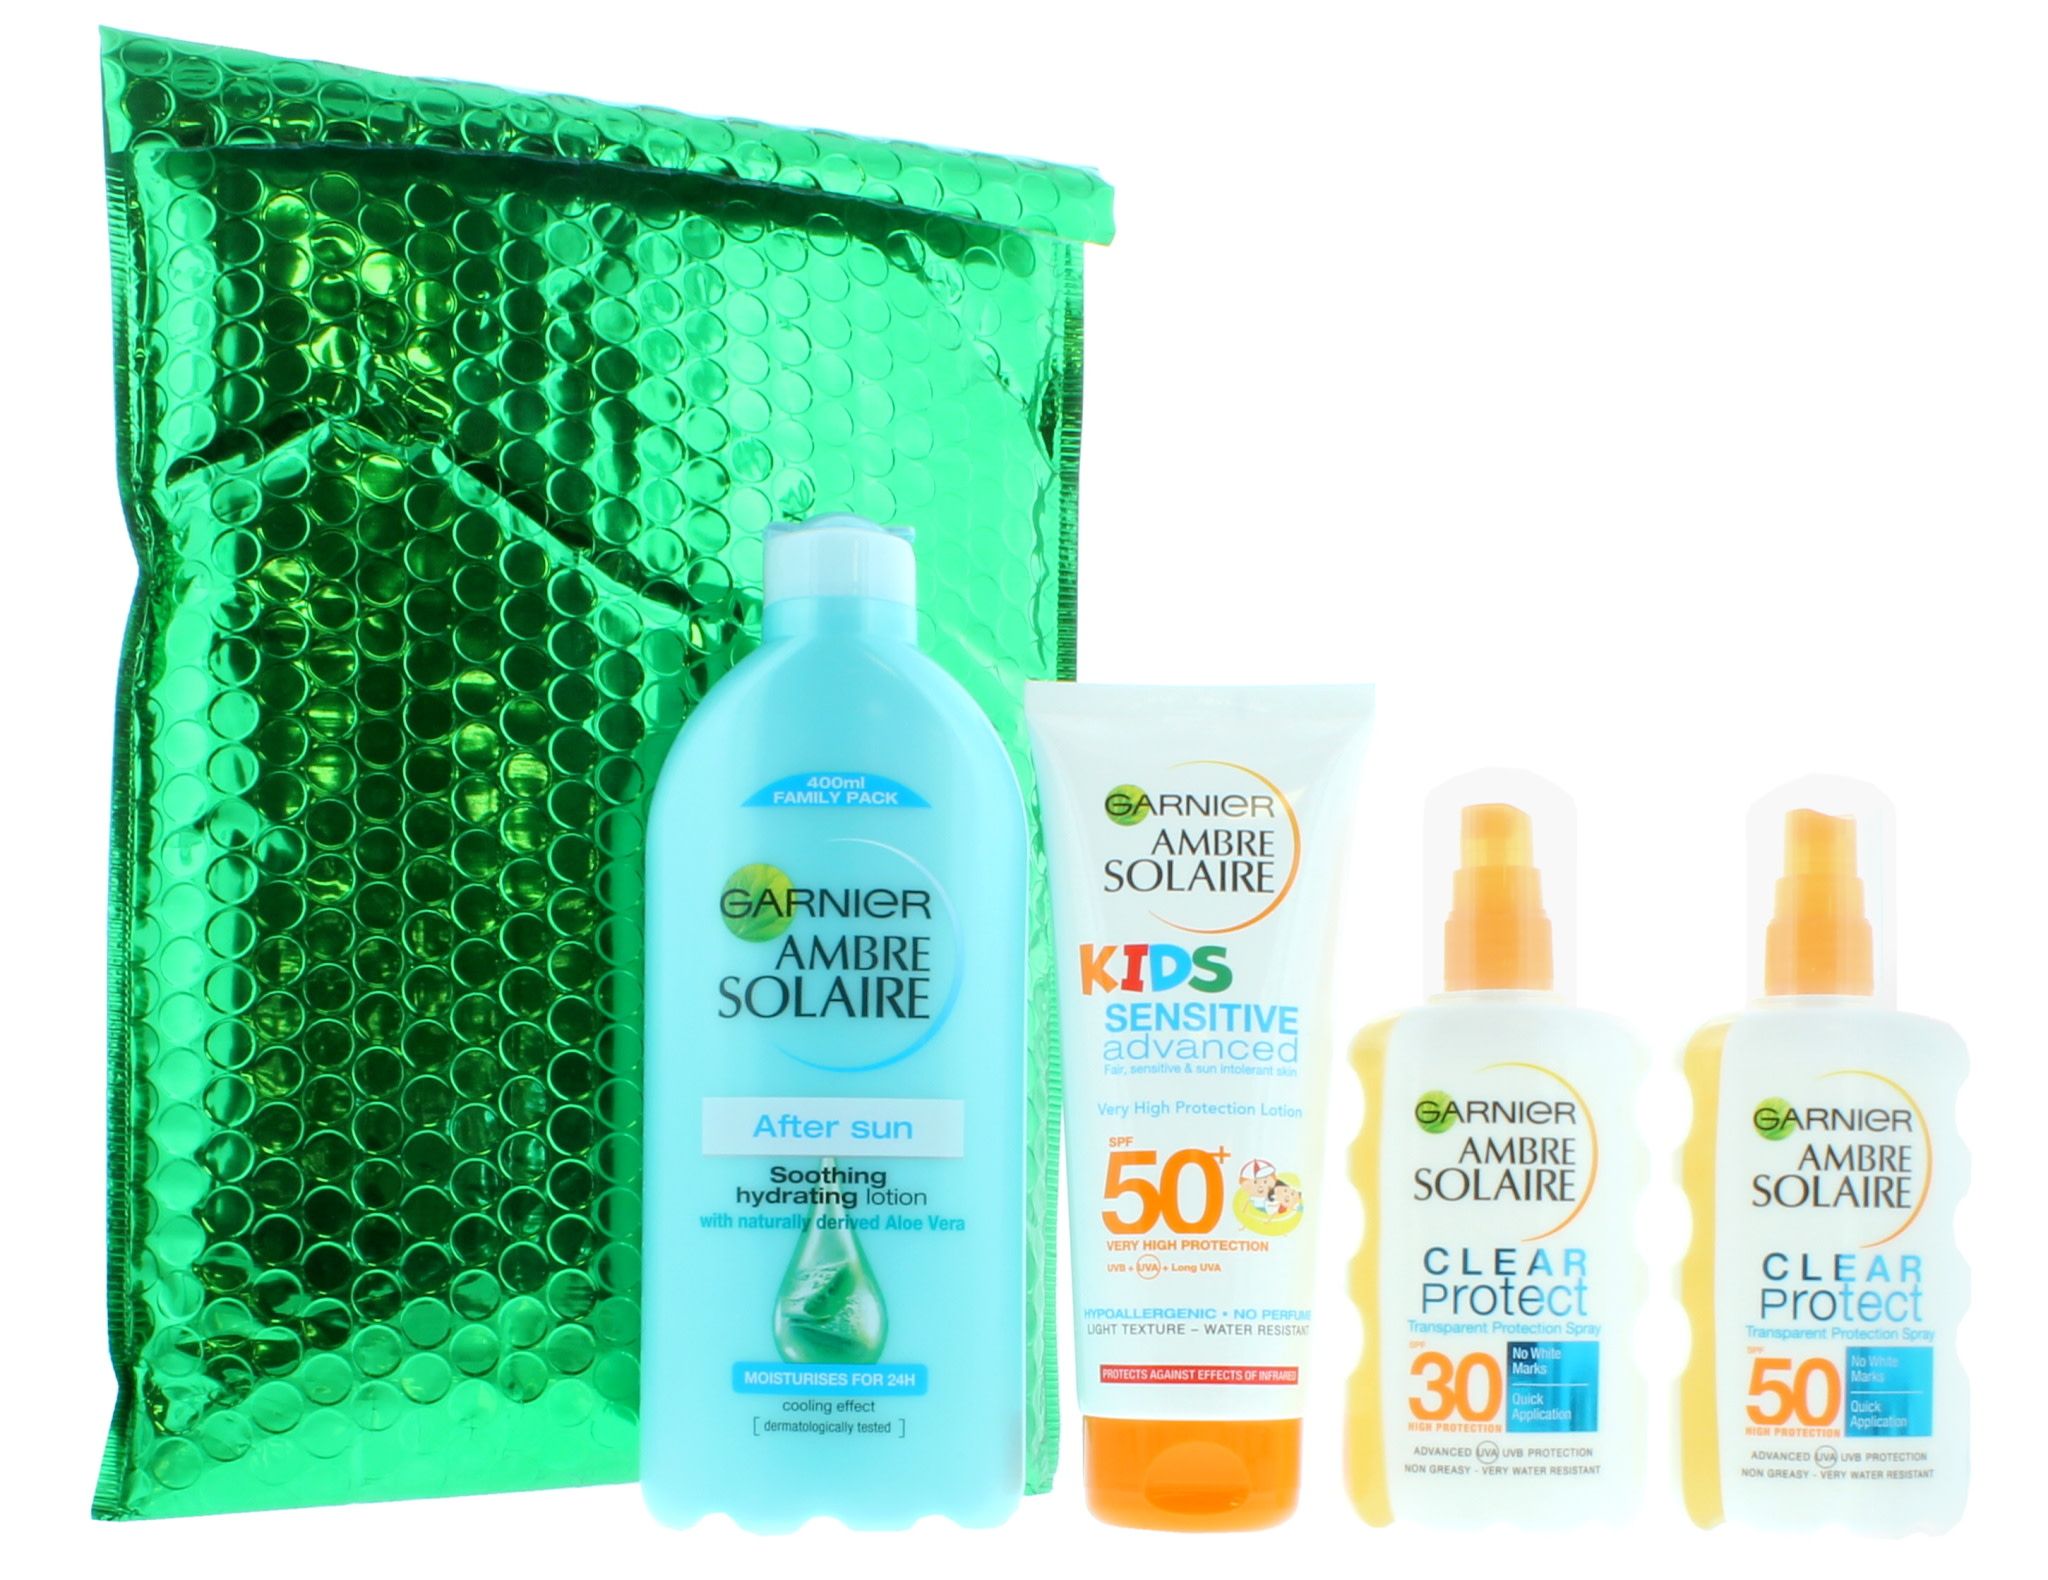 Ambre Solaire Family Sun Care Kit - After Sun + 1 x SPF30 & 1 x SPF50 and Kids SPF50. Clear Protect Sun Cream Spray - This high protection, transparent formula leaves no white marks. Non-greasy, water-resistant. Sensitive Enhanced Kids Lotion - This very high protection SPF50+ lotion is specially developed for childrens’ delicate and sensitive skin; hypoallergenic, no perfumes or colourants. Family Size After Sun Lotion - Garnier after sun is enriched with naturally derived Aloe Vera; the formula provides 24 hours hydration and soothes and nourishes skin. All of Garnier sun protection products contain UVA and UVB protection and is tested under paediatric control. Garnier’s research into sun protection is recognised by the British skin foundation. This is a pack of 3.